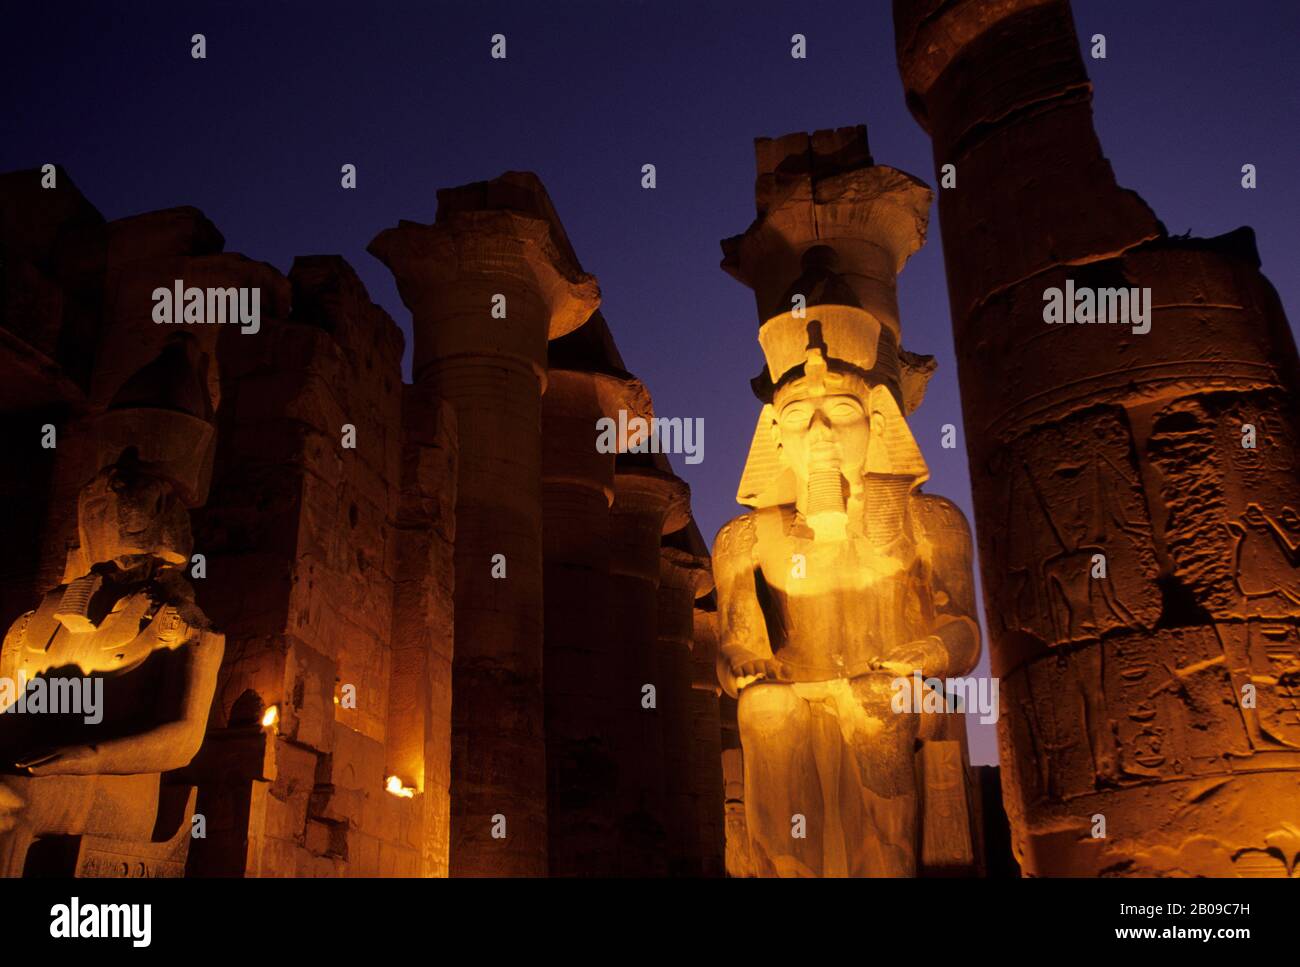 EGYPT, NILE RIVER, LUXOR, TEMPLE OF LUXOR, STATUE OF RAMSES II AT ENTRANCE TO GREAT COLONNADE Stock Photo